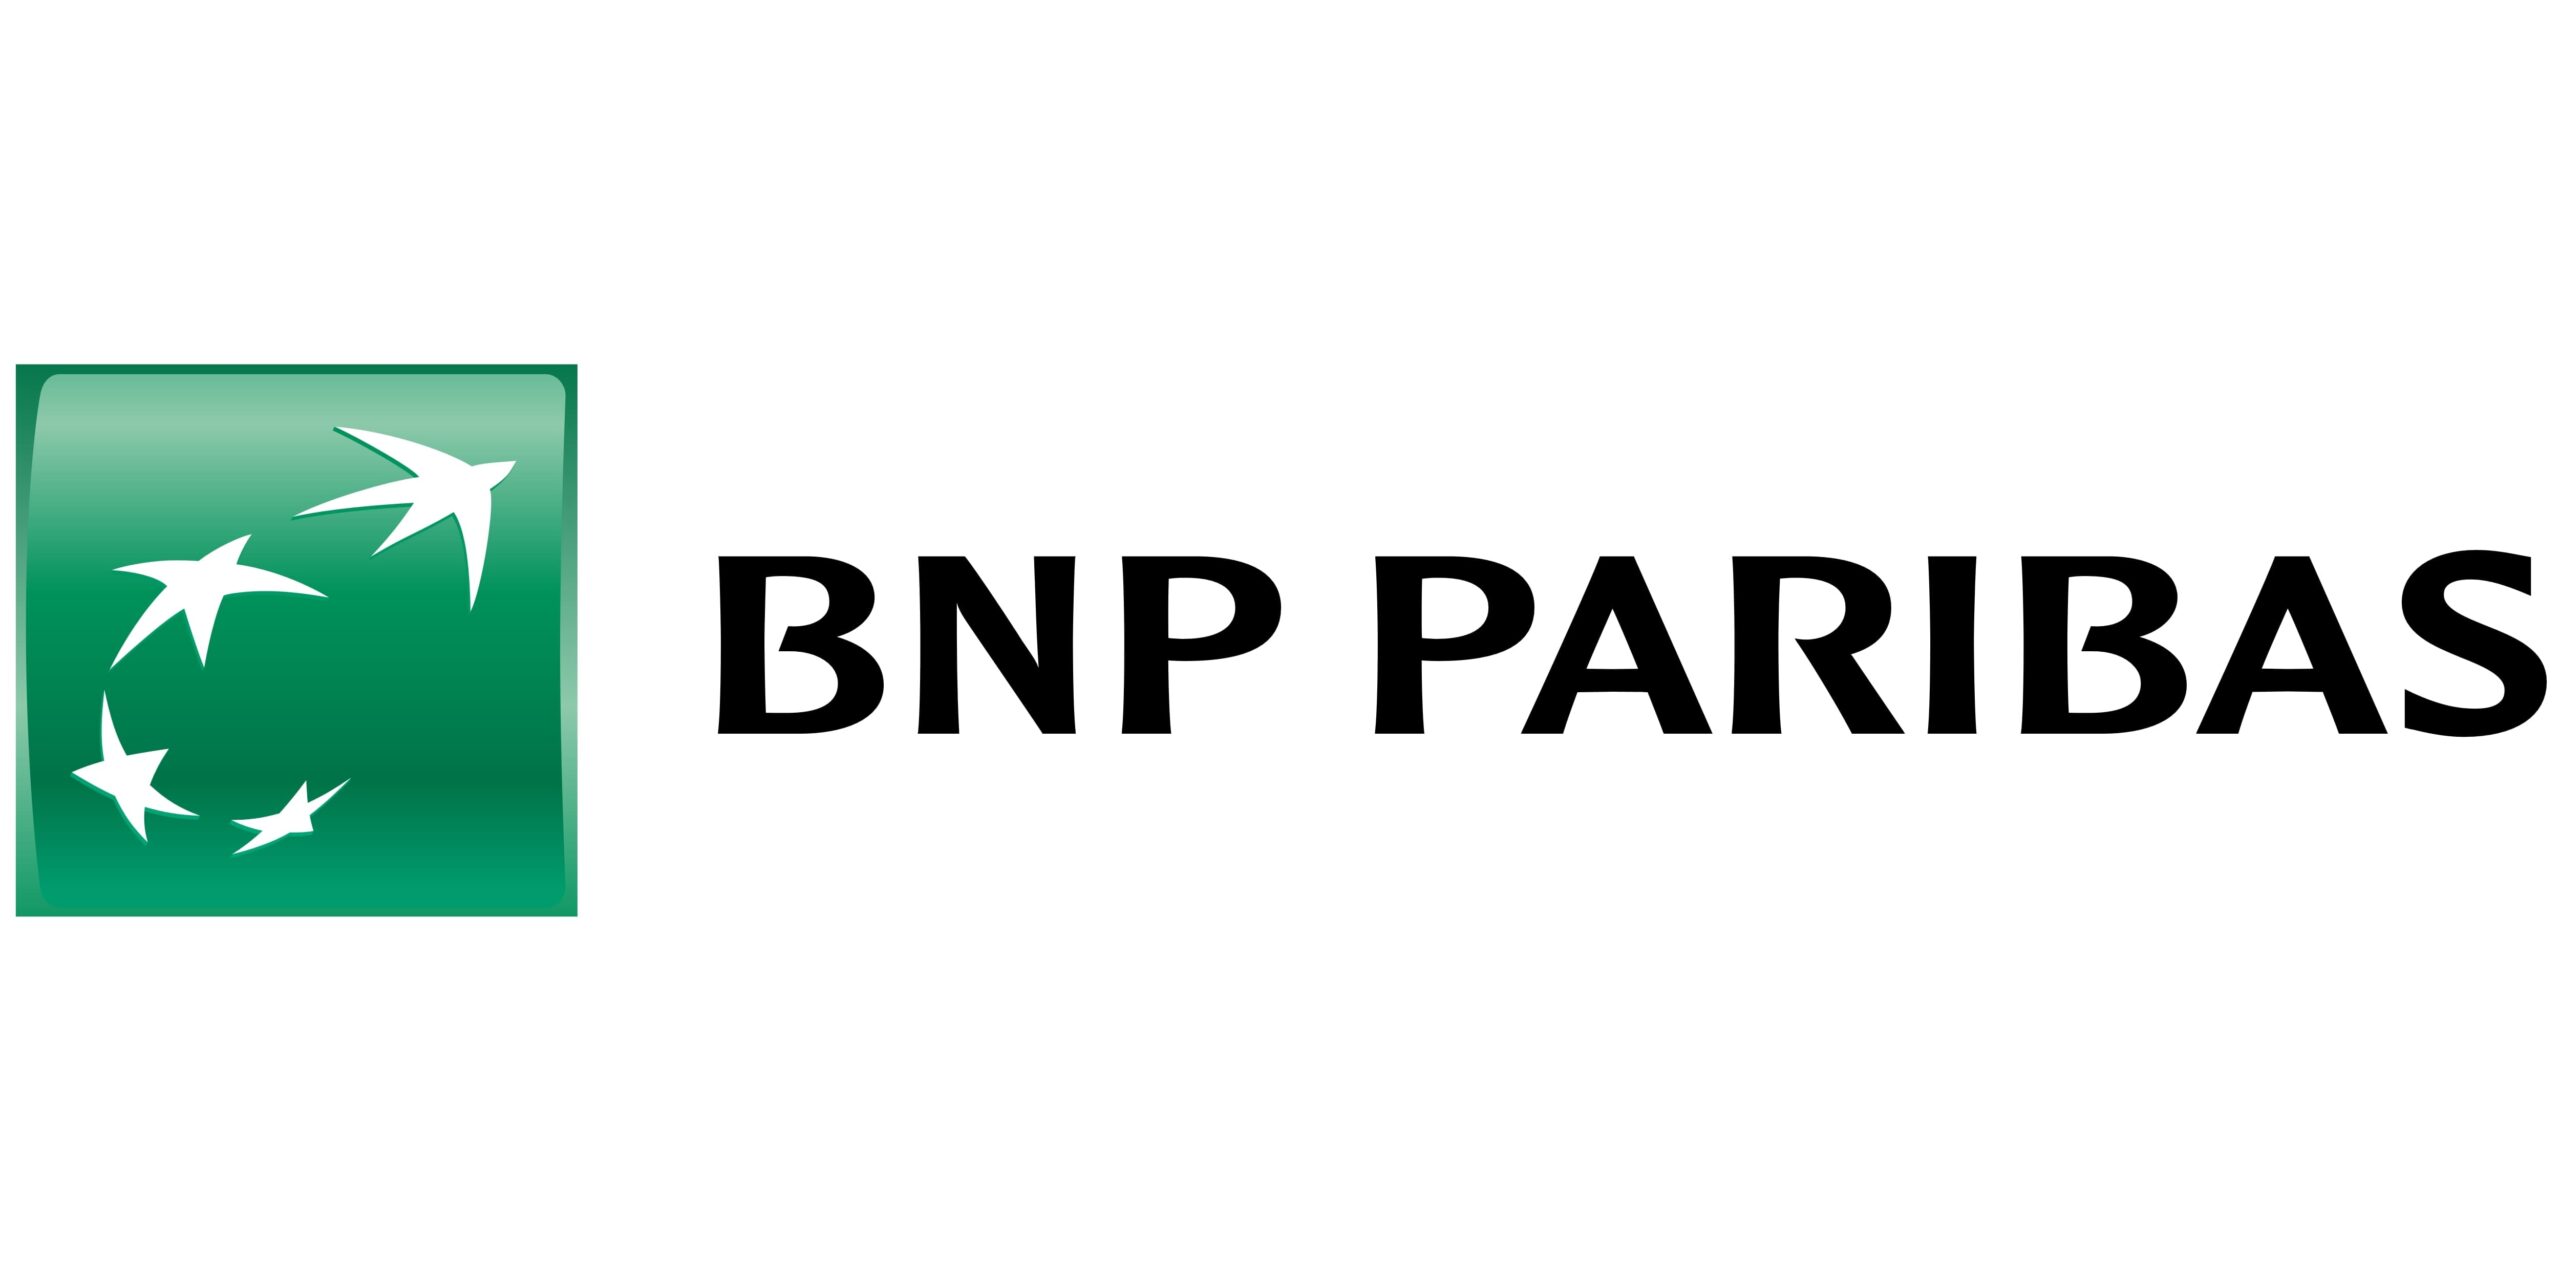 BNP Paribas and The House of Marketing